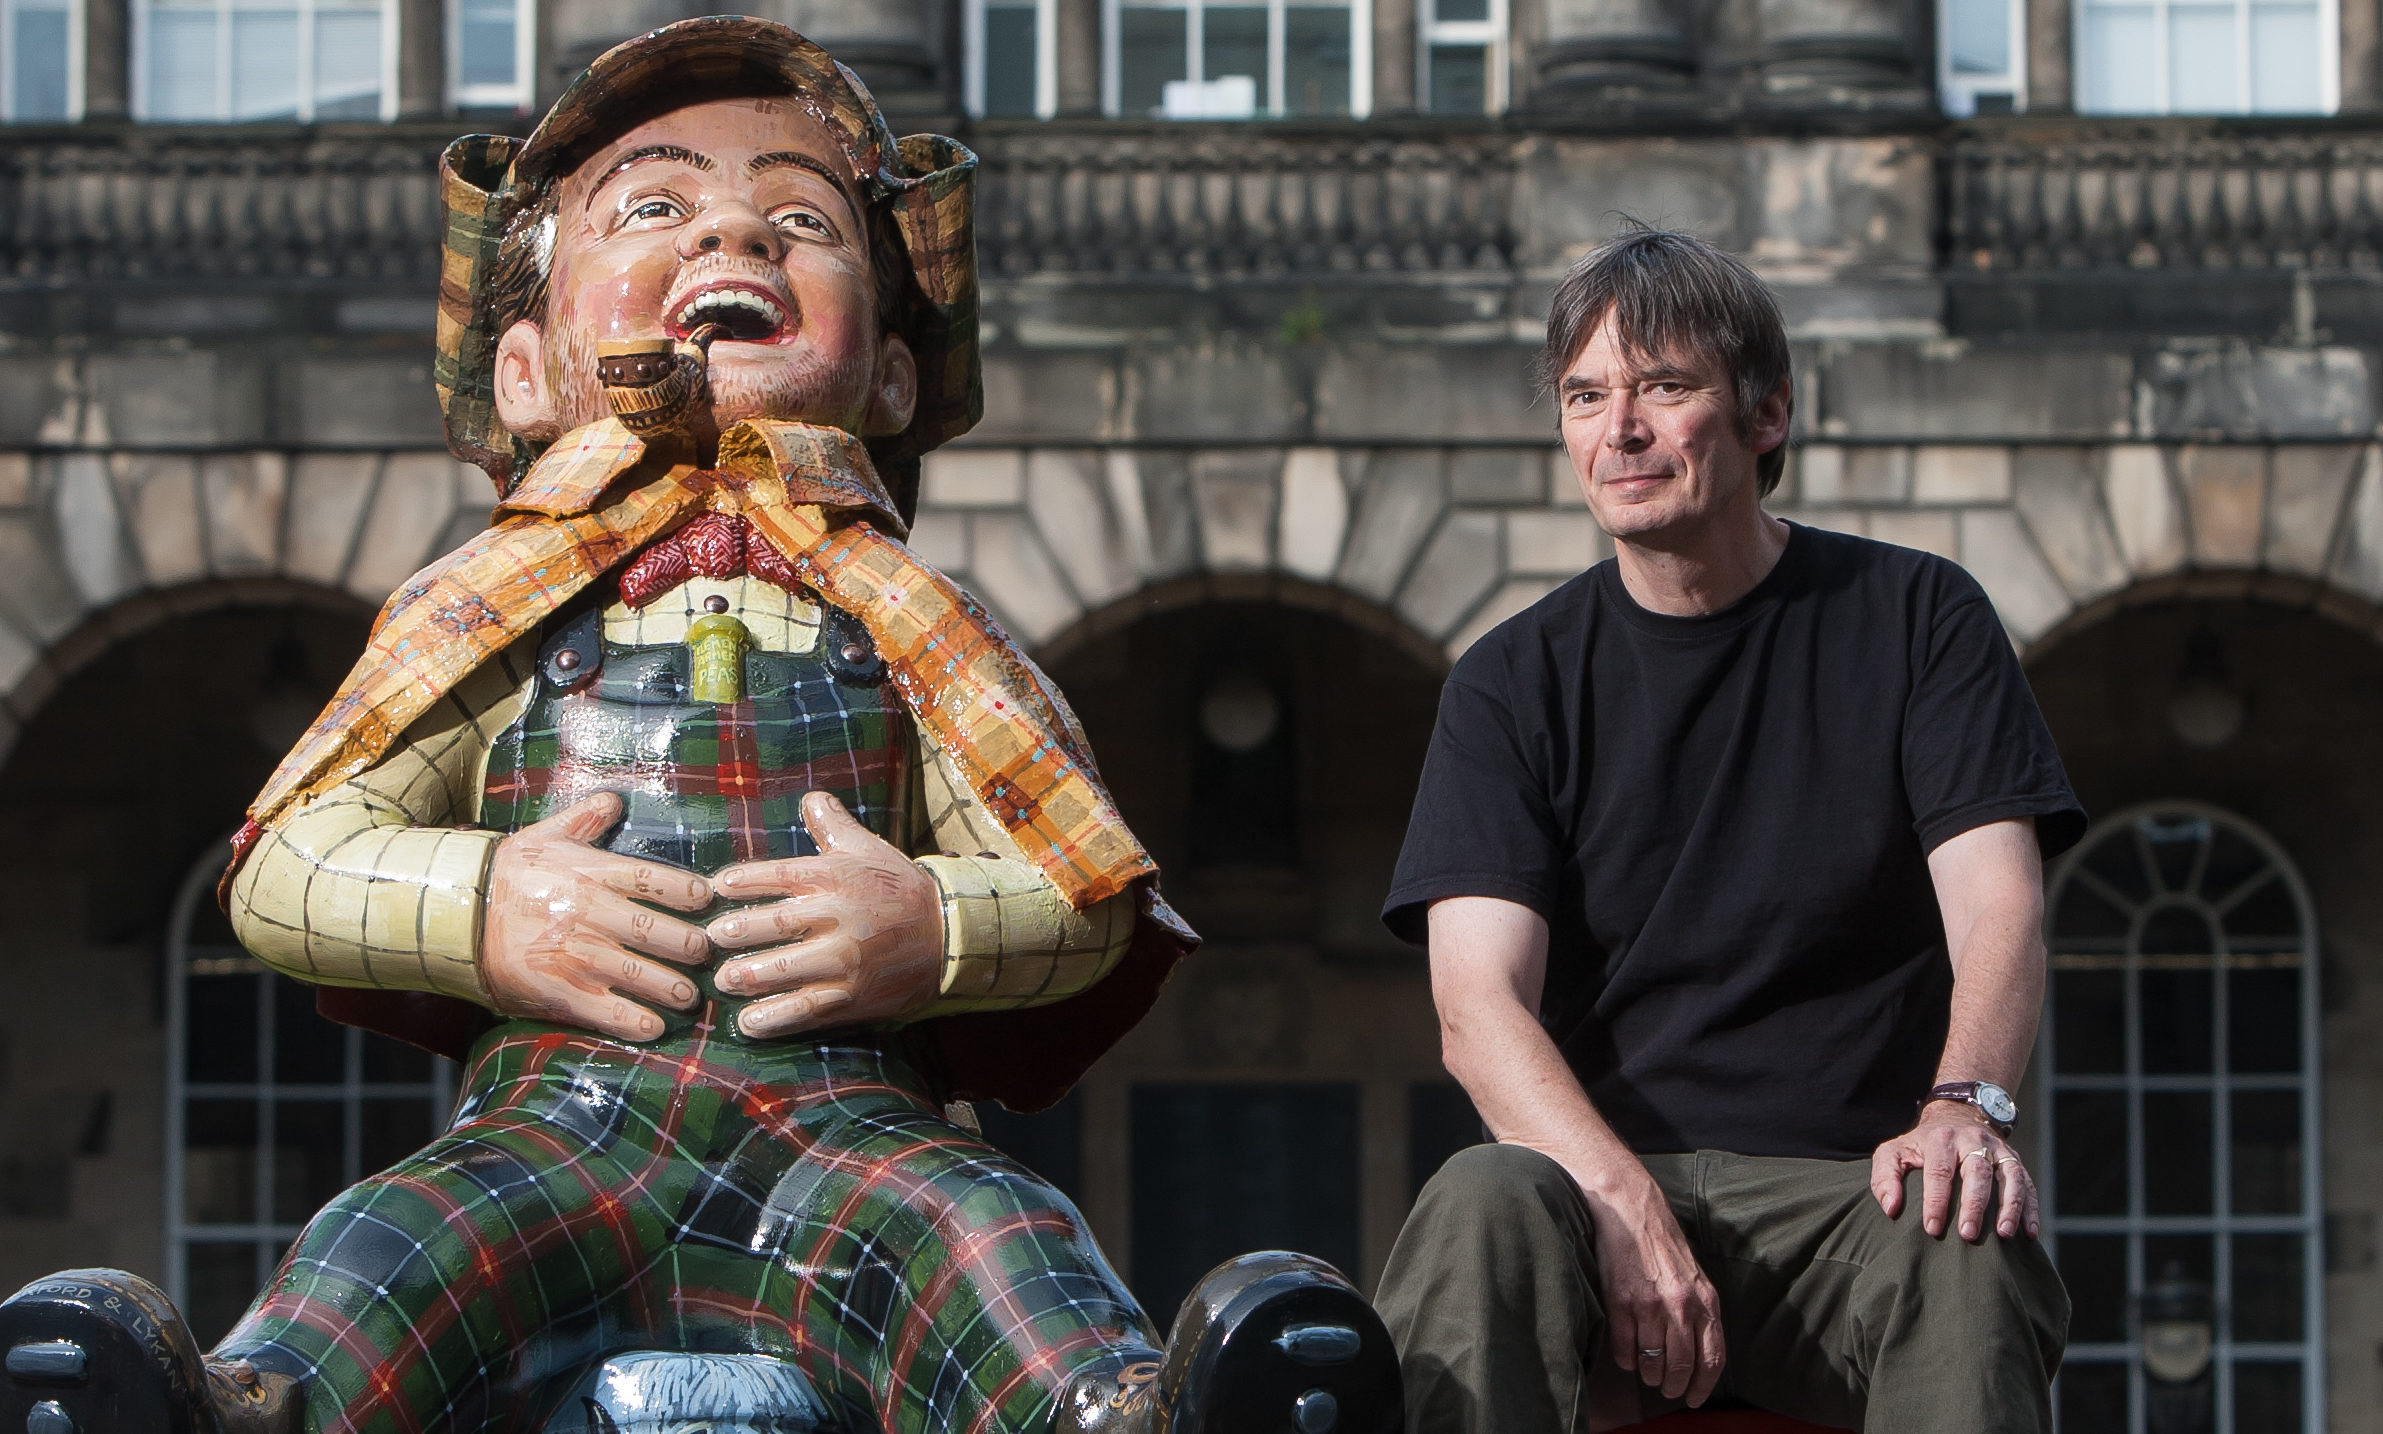 Author Ian Rankin supporting the Edinburgh Children's Hospital Charity with the Sherlock Holmes Oor Wullie Statue